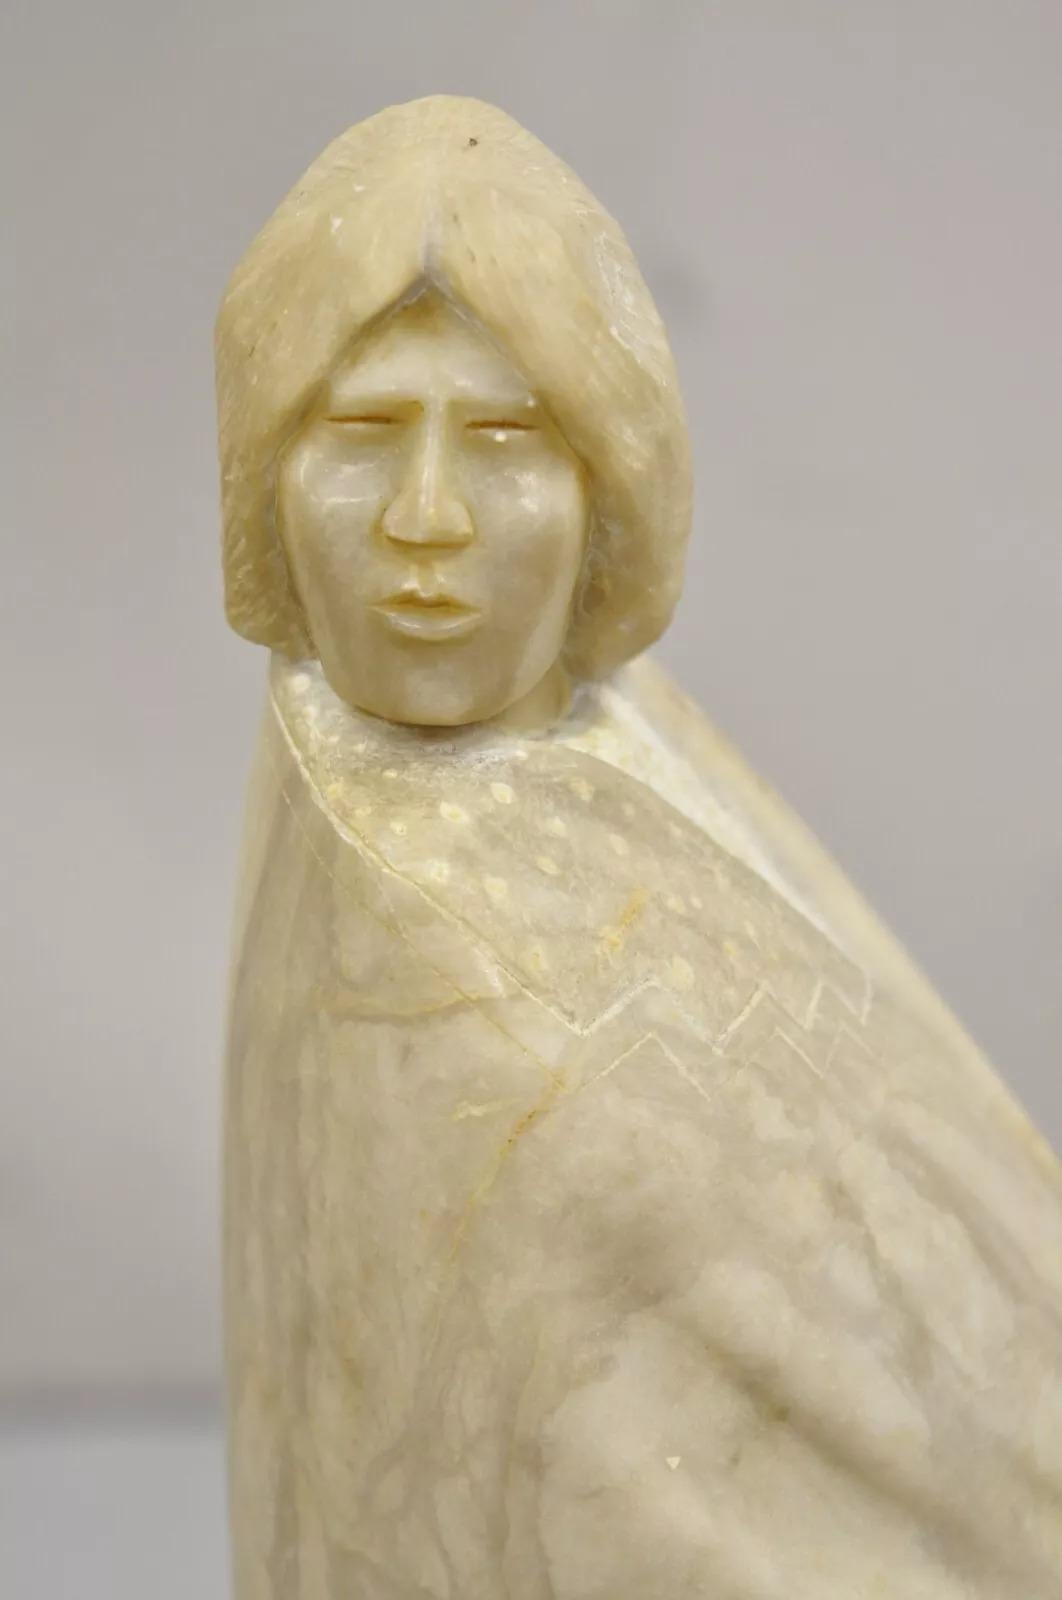 Vintage Carved Alabaster American Indian Navajo Sculpture by Gregory Johnson, Approx 25 lbs. Signed 